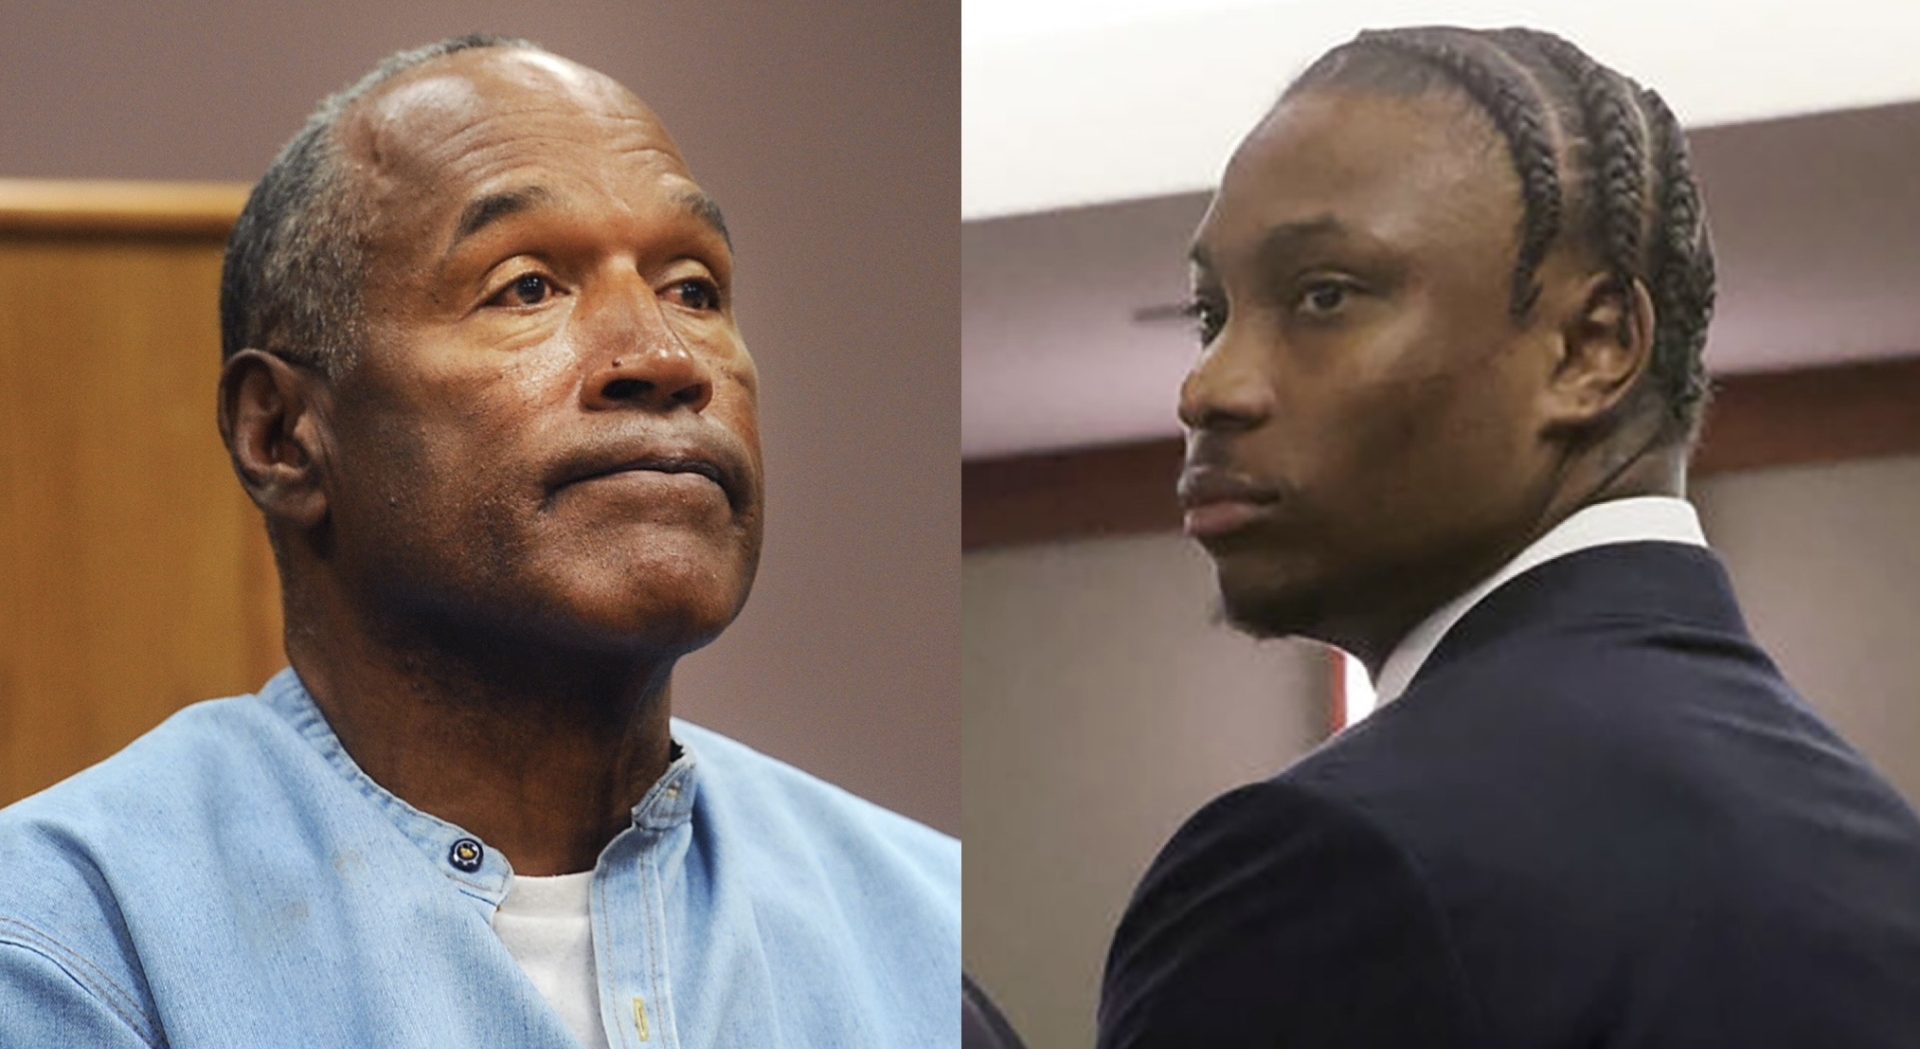 O.J. Simpson Speaks Out After Henry Ruggs III Is Sentenced To 3-10 Years For Deadly DUI Crash: ‘This Math Is Not Adding Up’ thumbnail